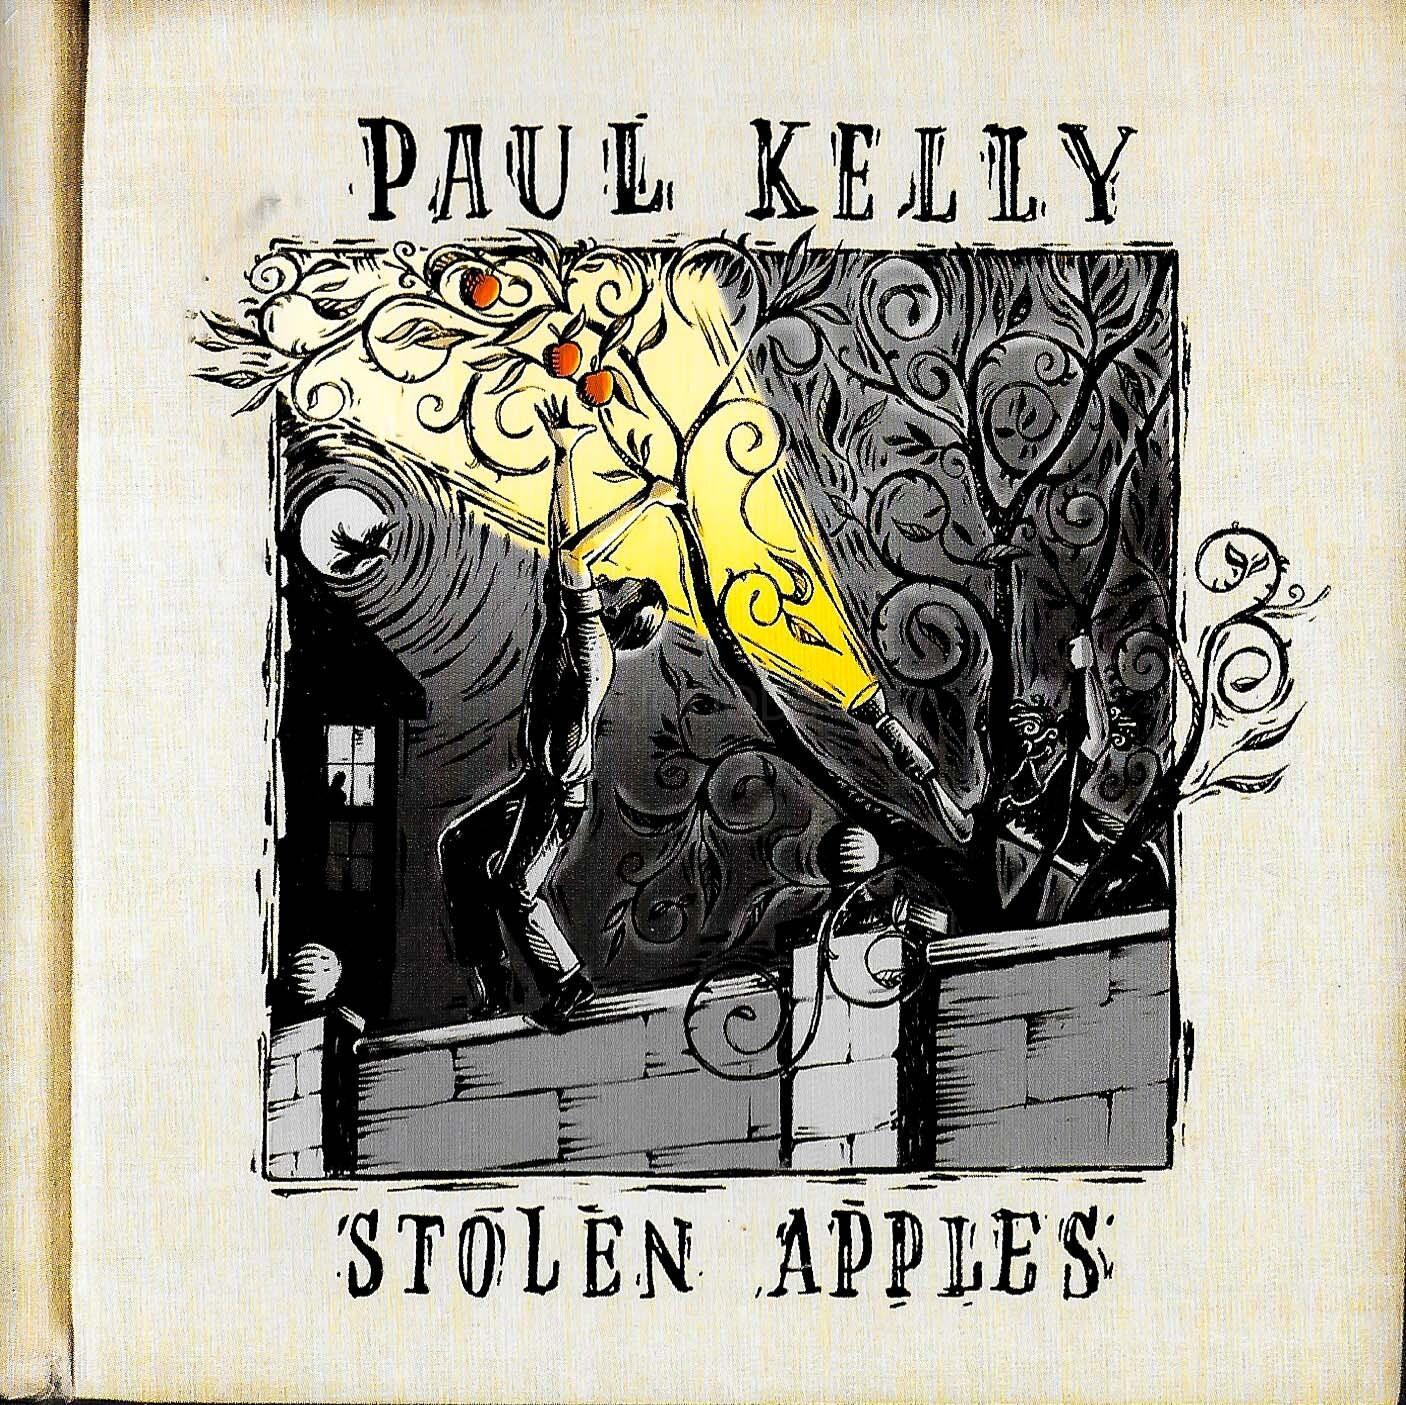 Paul Kelly - Paul Kelly - Stolen Apples PRE-OWNED CD: DISC EXCELLENT